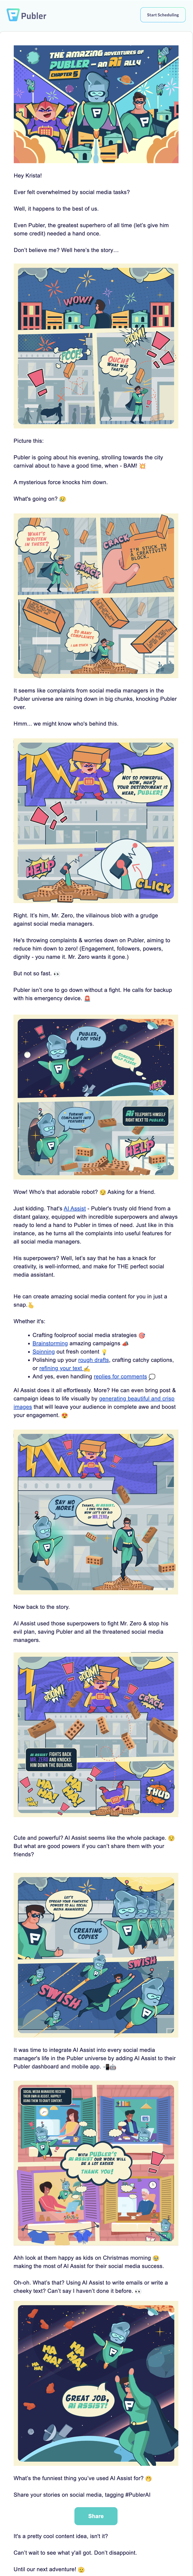 Storytelling in SaaS Emails: Screenshot of Publer's email that uses comics to tell the story